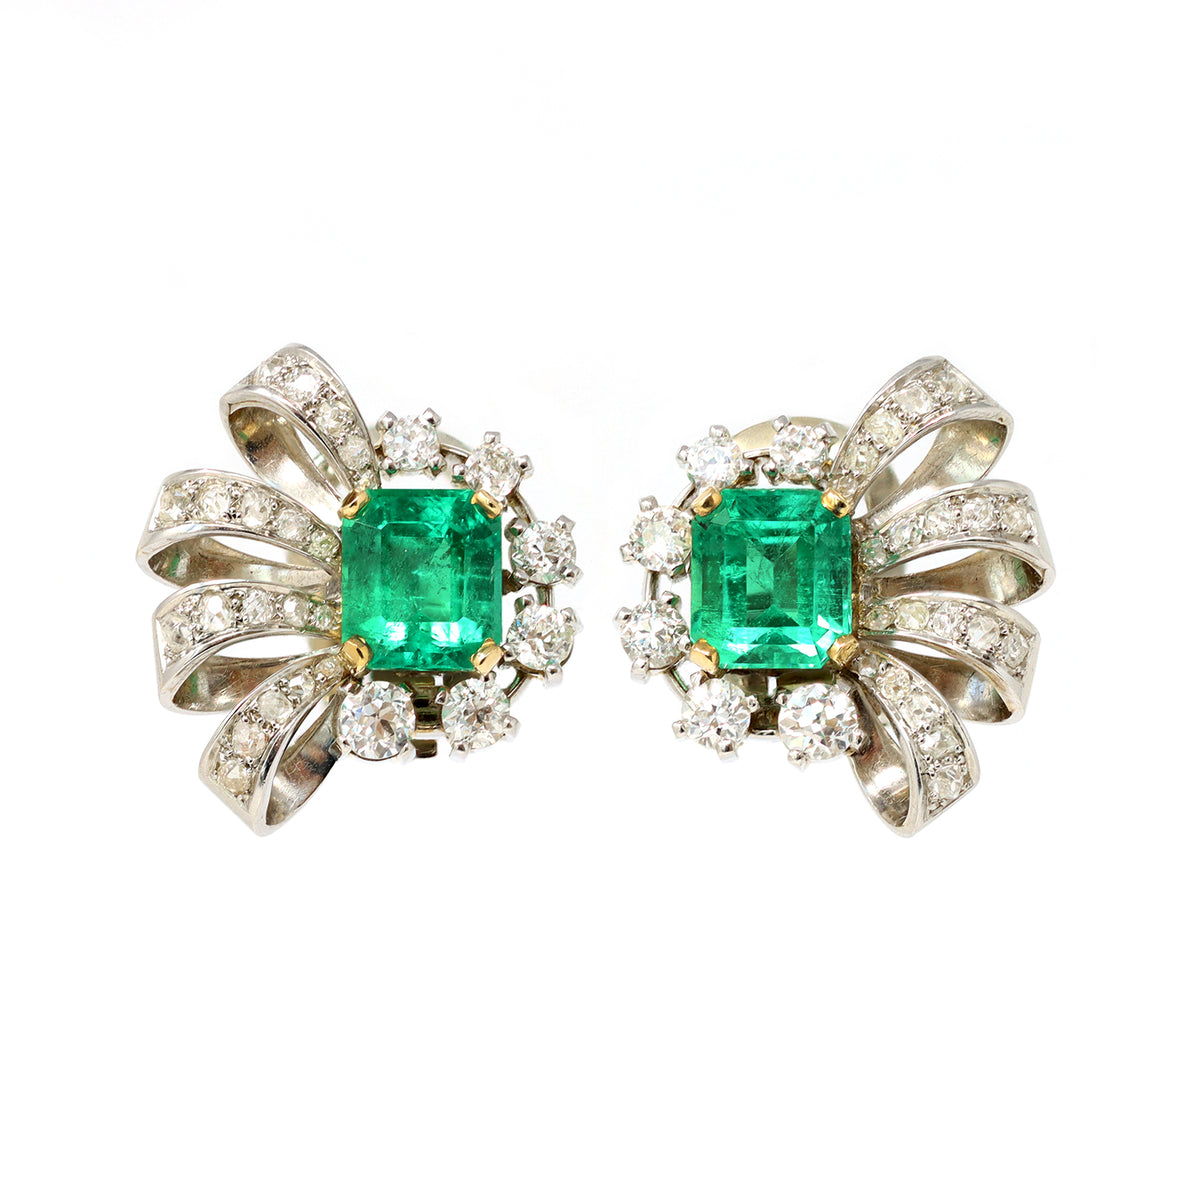 Pair of Emerald and Diamond Clip on Earrings in Platinum, Circa 1940 ...